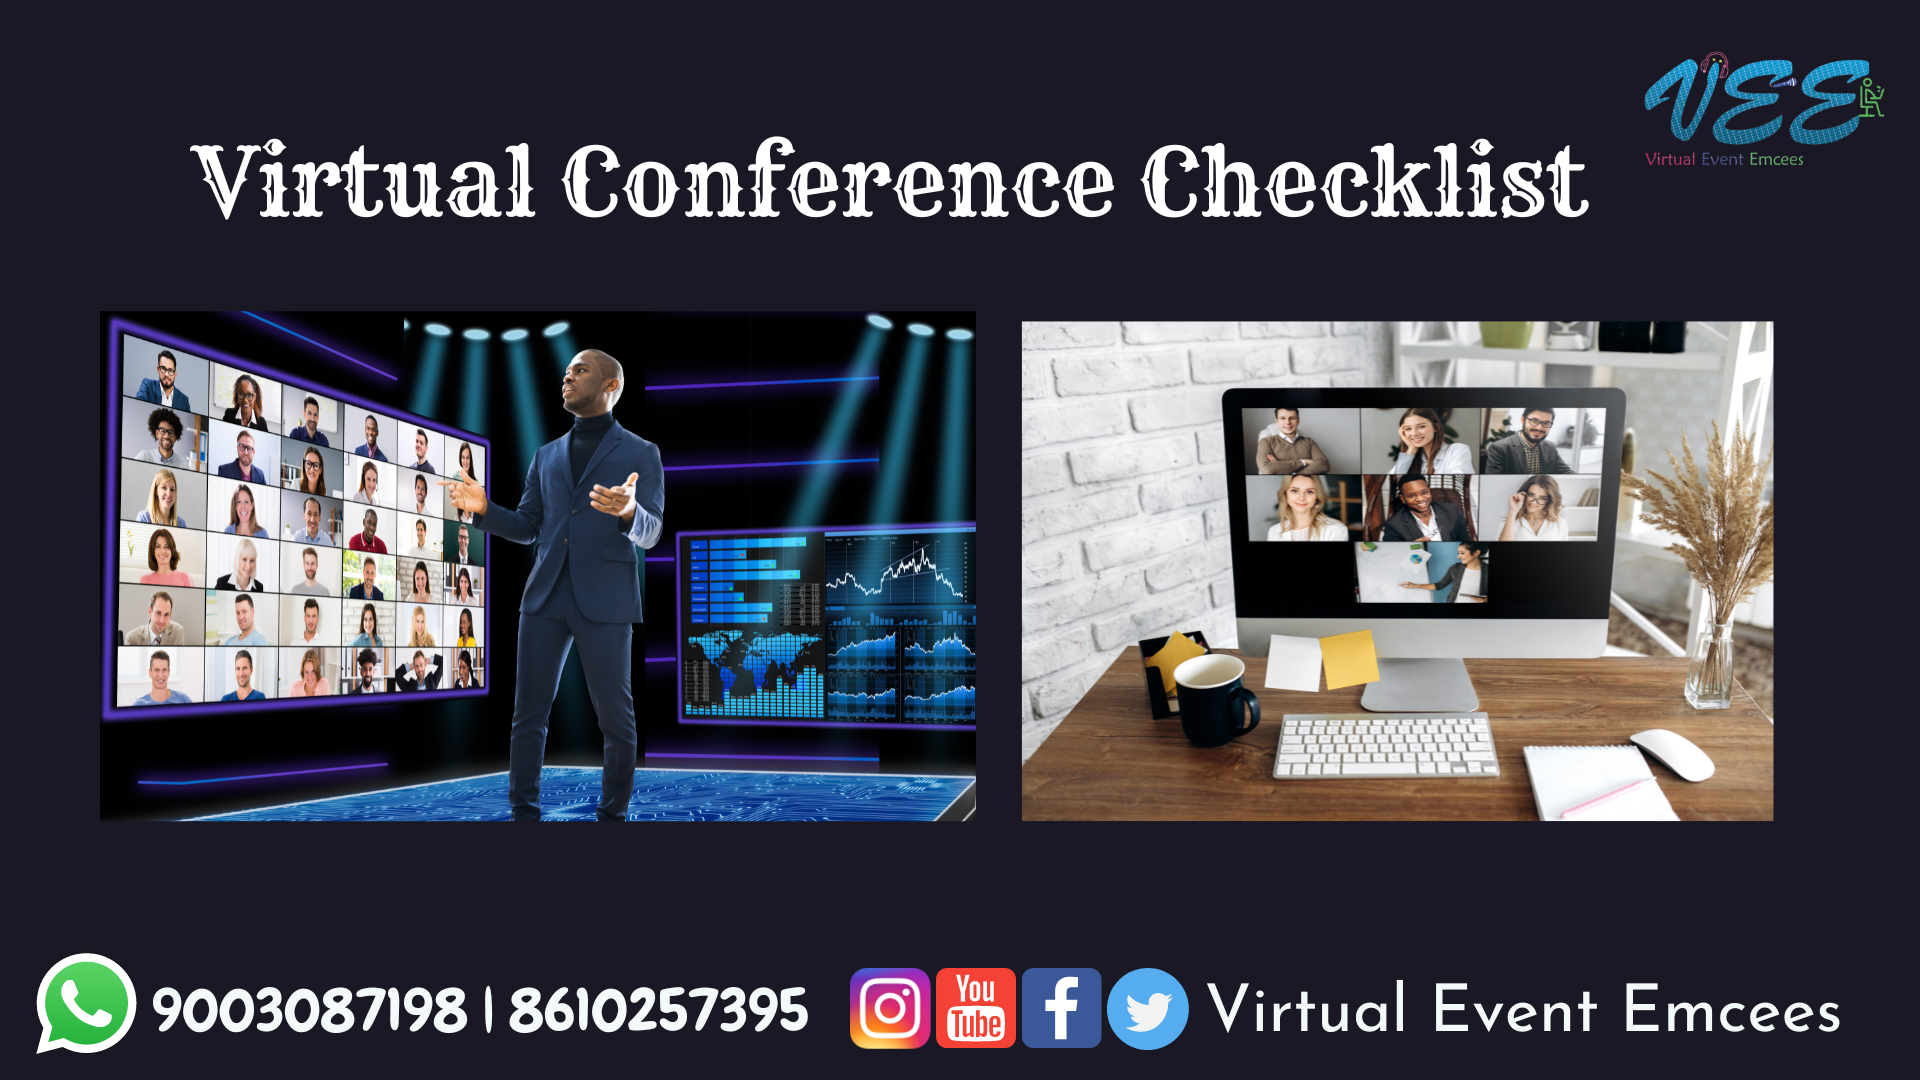 Checklist for Virtual Conference by Chennai Male Host RK Thamizharasan